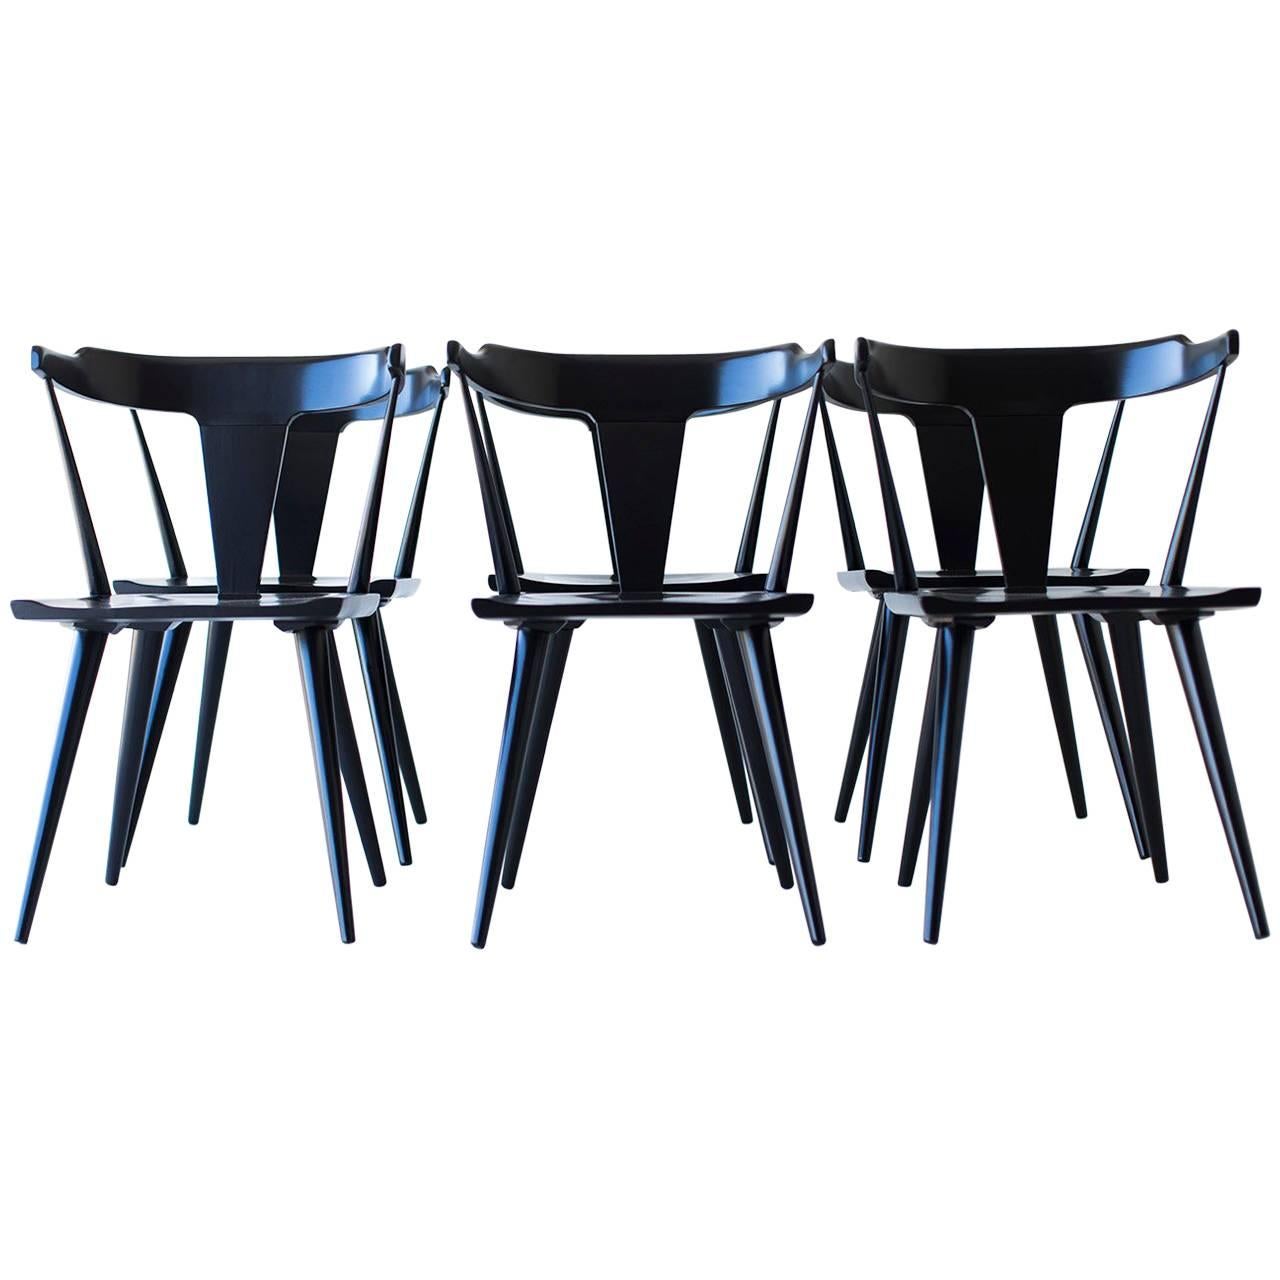 Paul McCobb Dining Chairs for Winchendon, Planner Group